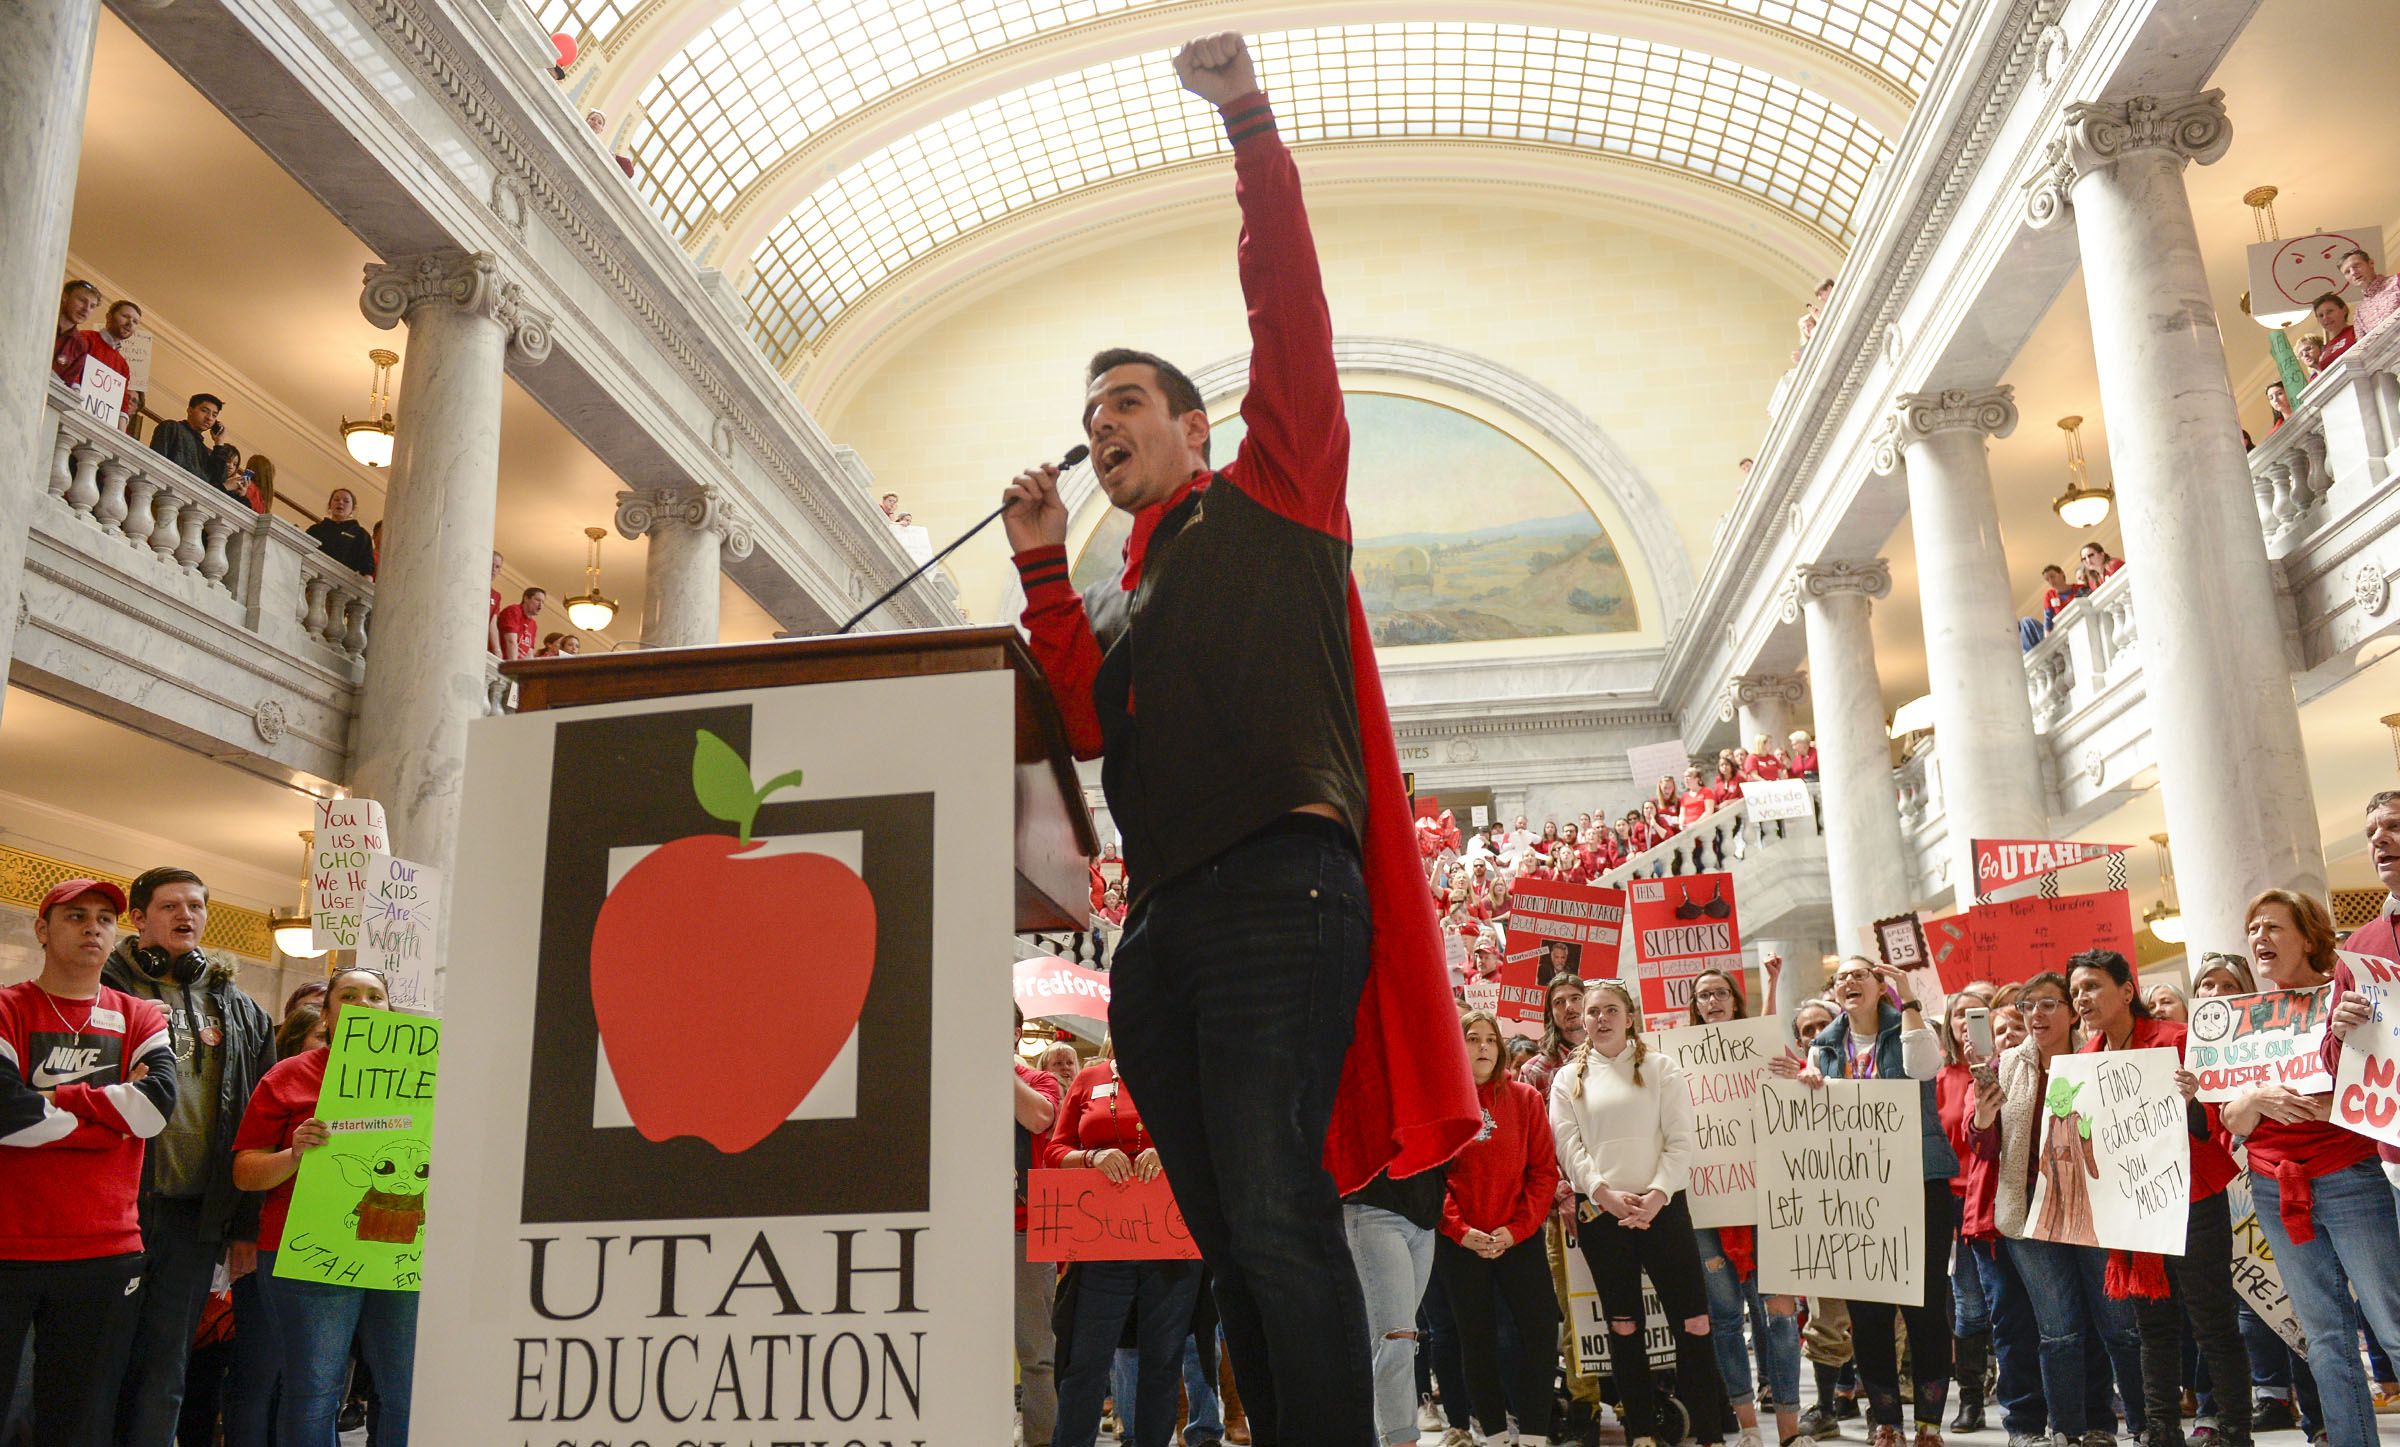 (Leah Hogsten  |  The Salt Lake Tribune) Franz Villate, a social studies teacher at Innovations High School leads the crowd in a "Students First!" chant. Teachers in Salt Lake City’s teacher’s union stage a walkout and rally at the Capitol to protest teacher pay in an effort to pressure the Utah State Legislature as it decides how much money it will allocate to the state’s education system Friday. Teachers began the rally at the Federal Building and walked up Capitol Hill to the statehouse for a rally in the rotunda, Feb. 28, 2020.